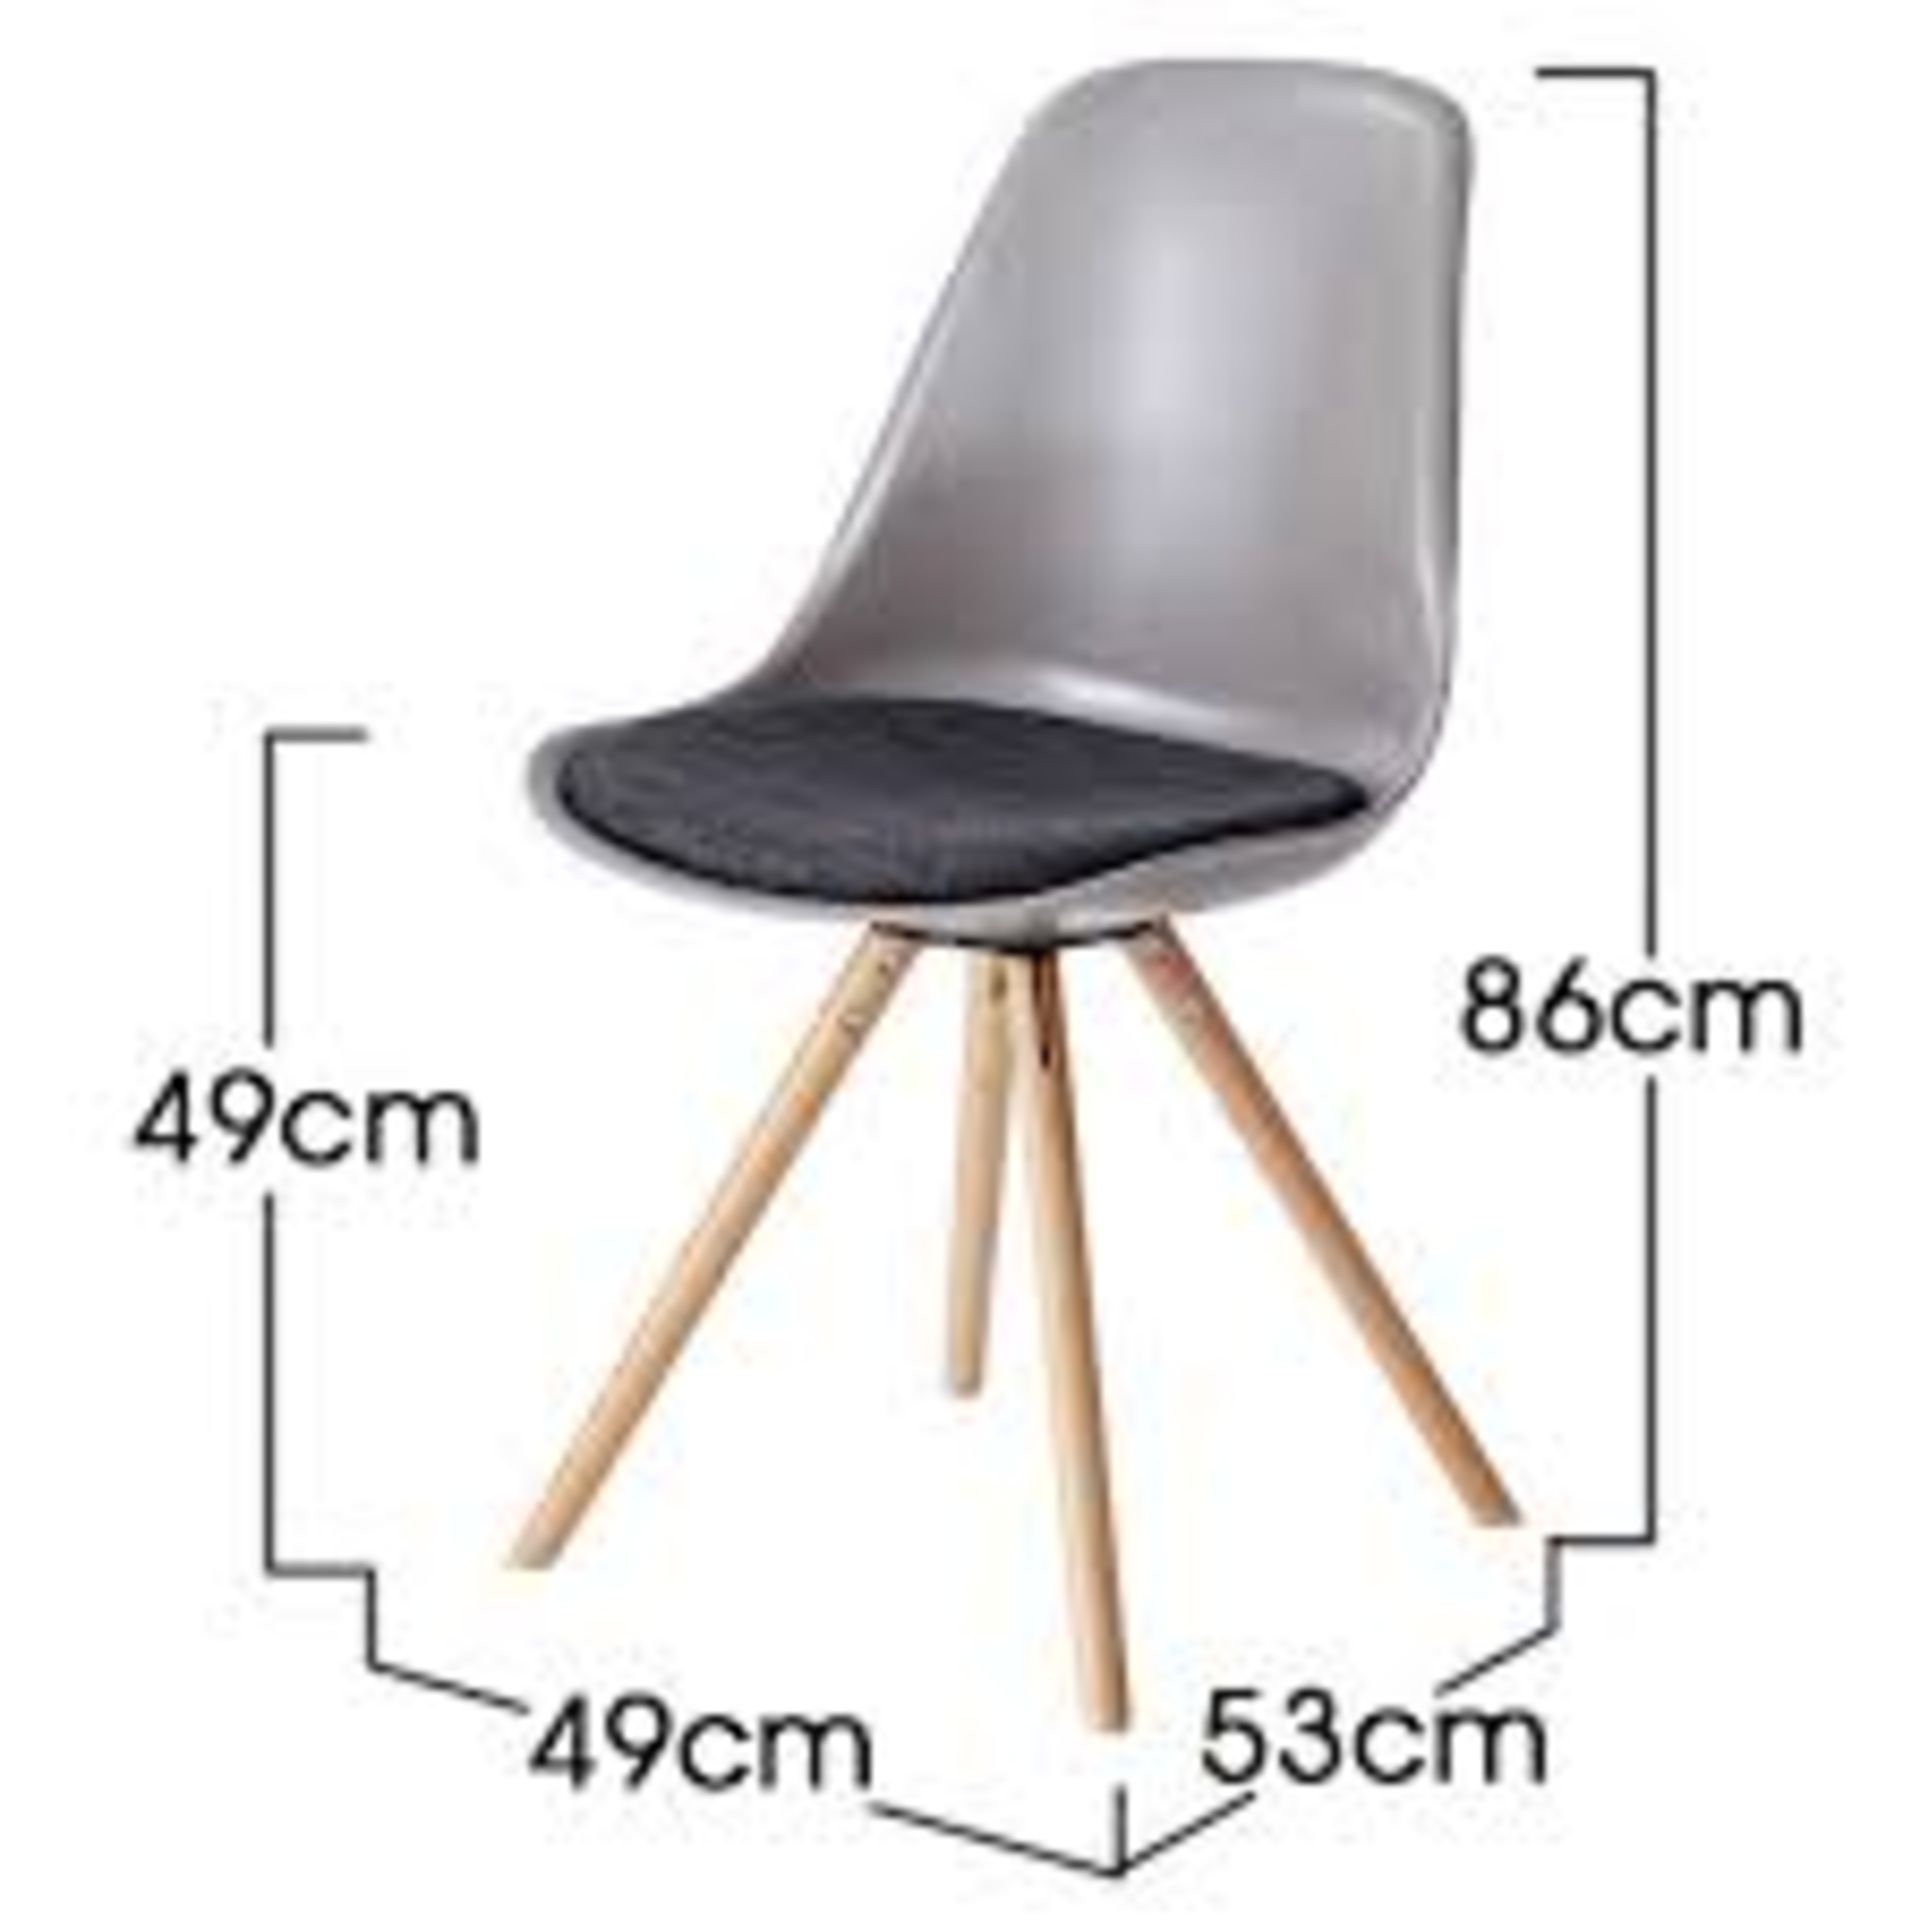 Set of 4 x 'TURNER' Contemporary Scandinavian-style Dining Chairs in Brown With Grey Seat Pads - Mid - Image 4 of 4